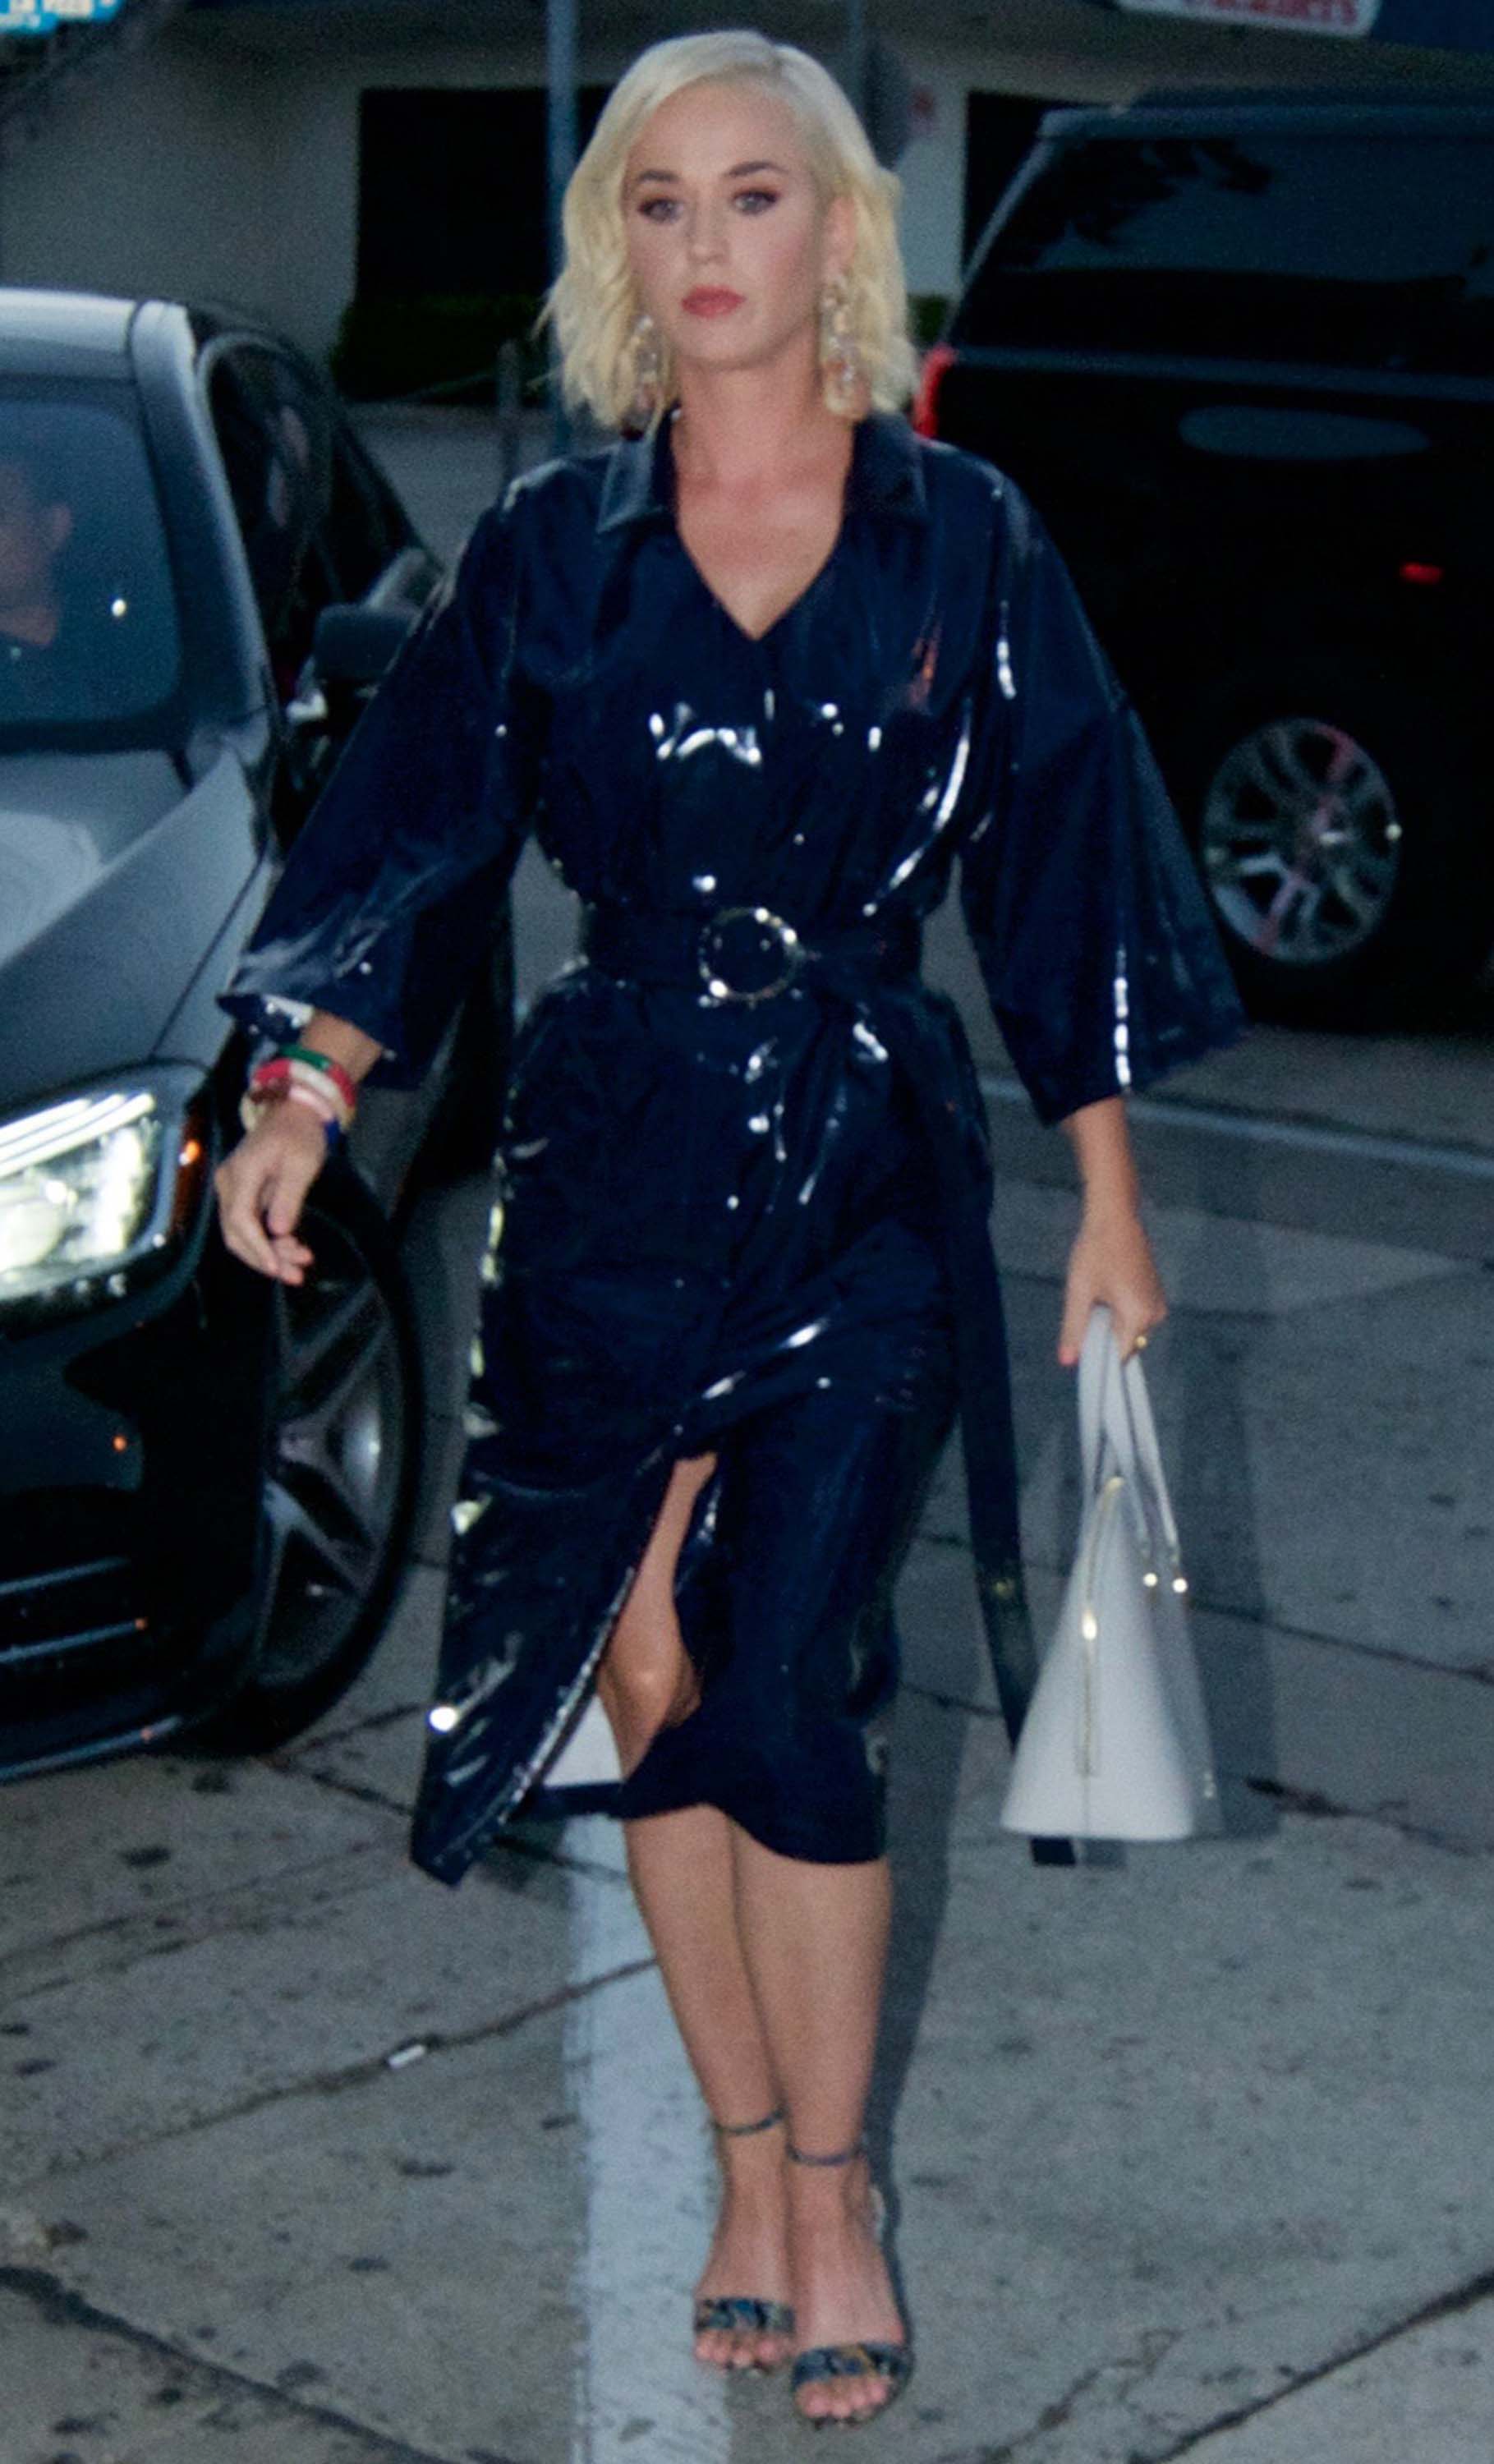 Katy Perry is spotted leaving Craig’s restaurant